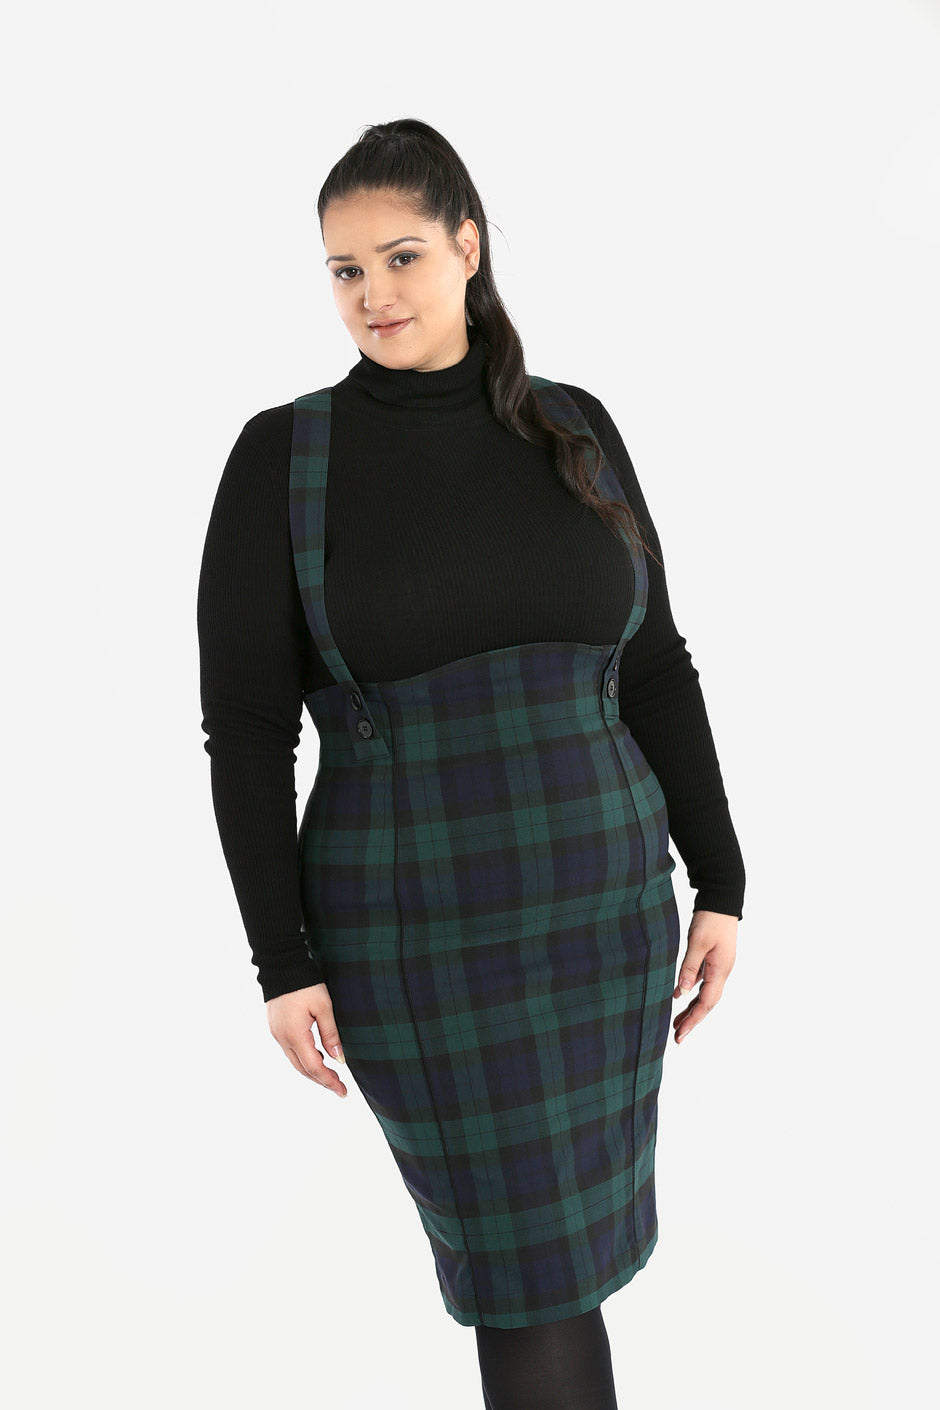 Evelyn Pinafore Pencil Skirt by Hell Bunny